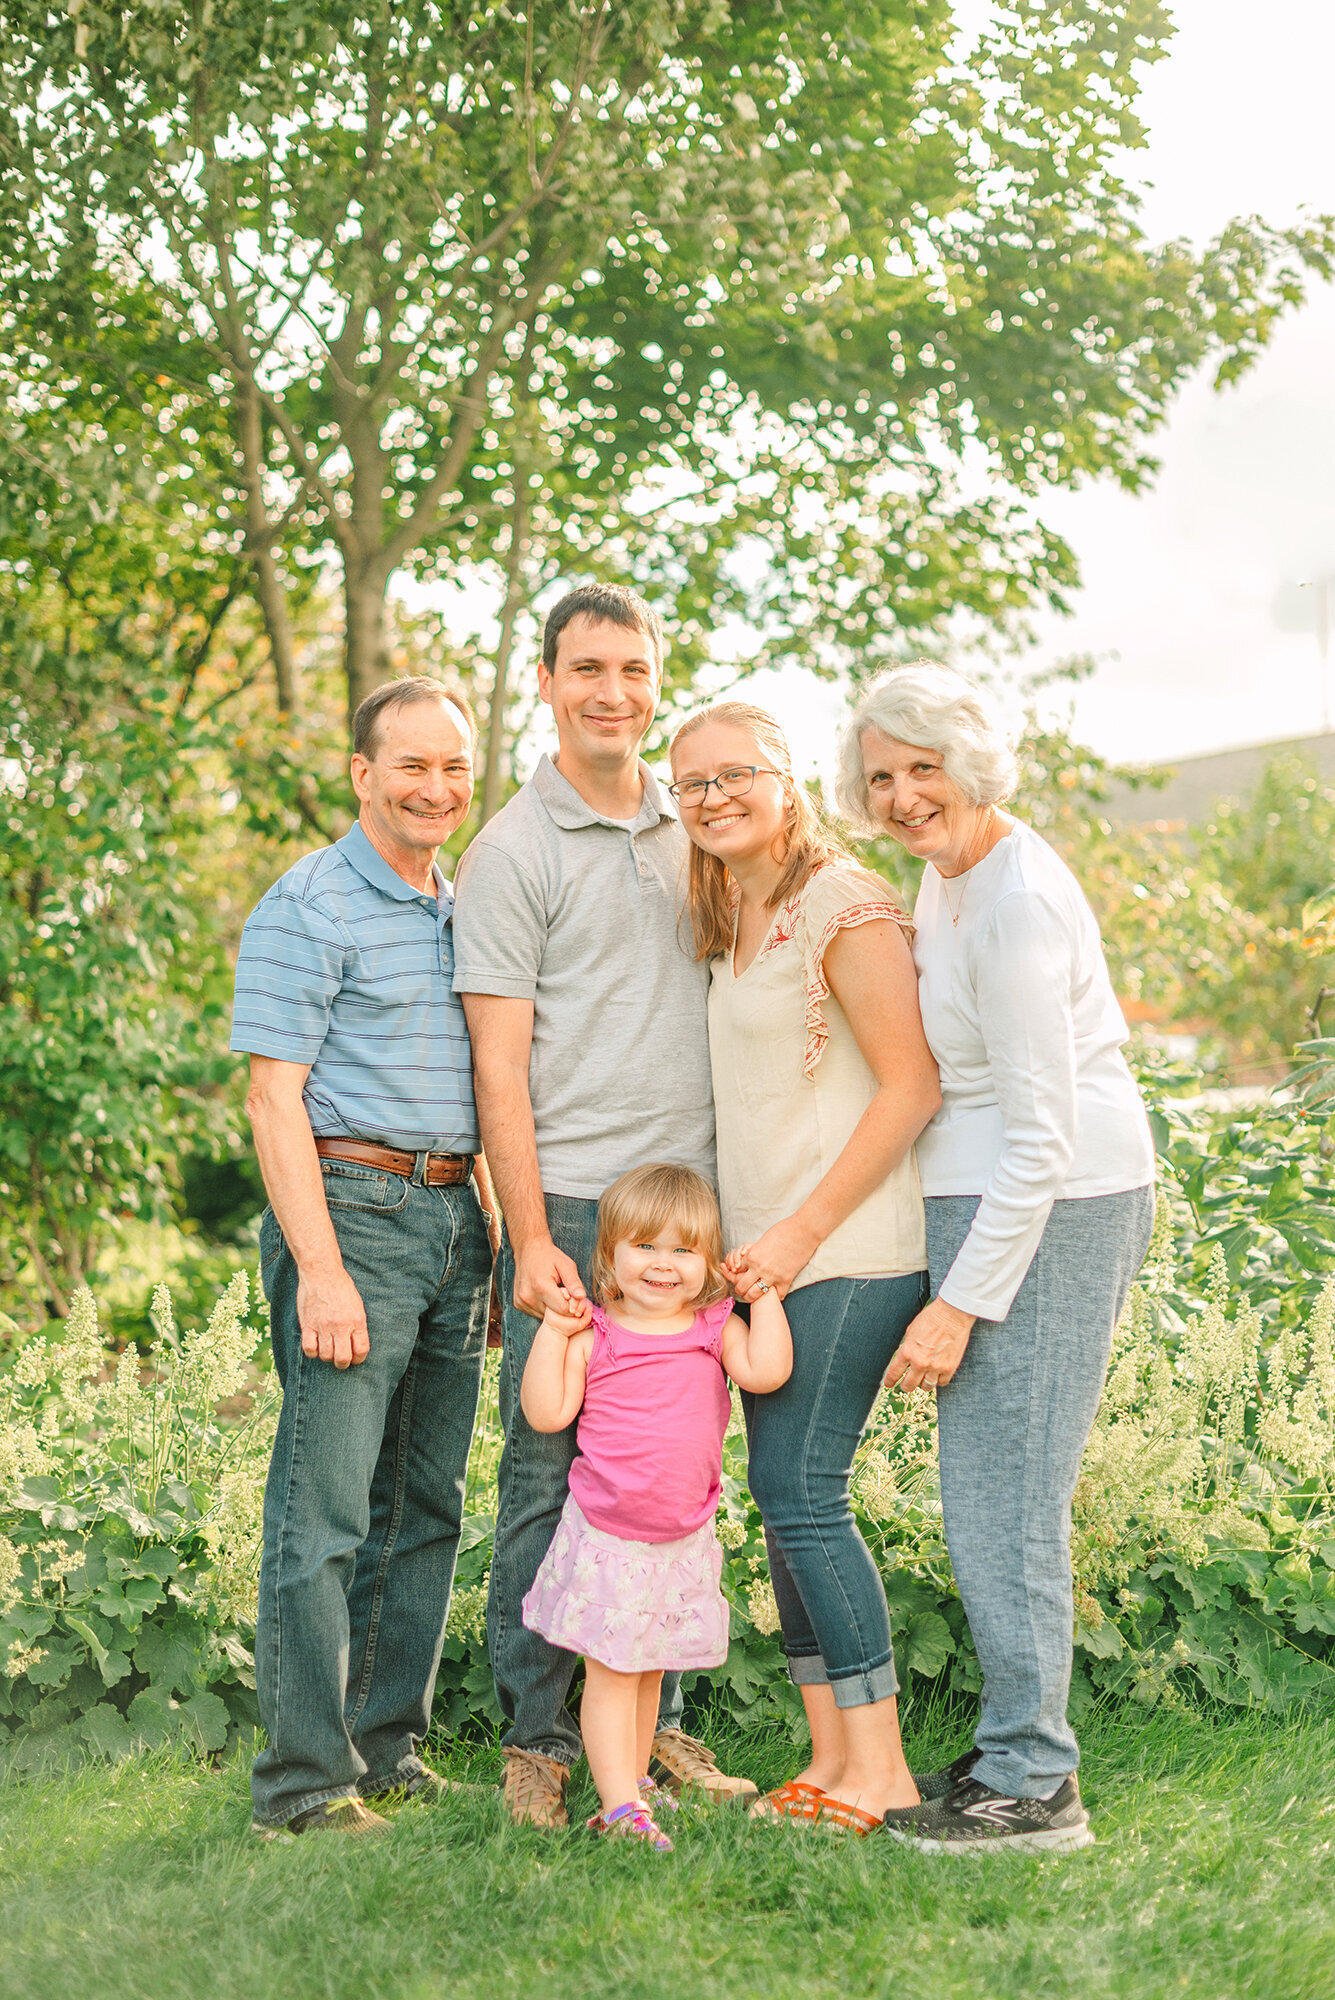 Extended family photos at Cantigny Park in Wheaton, IL